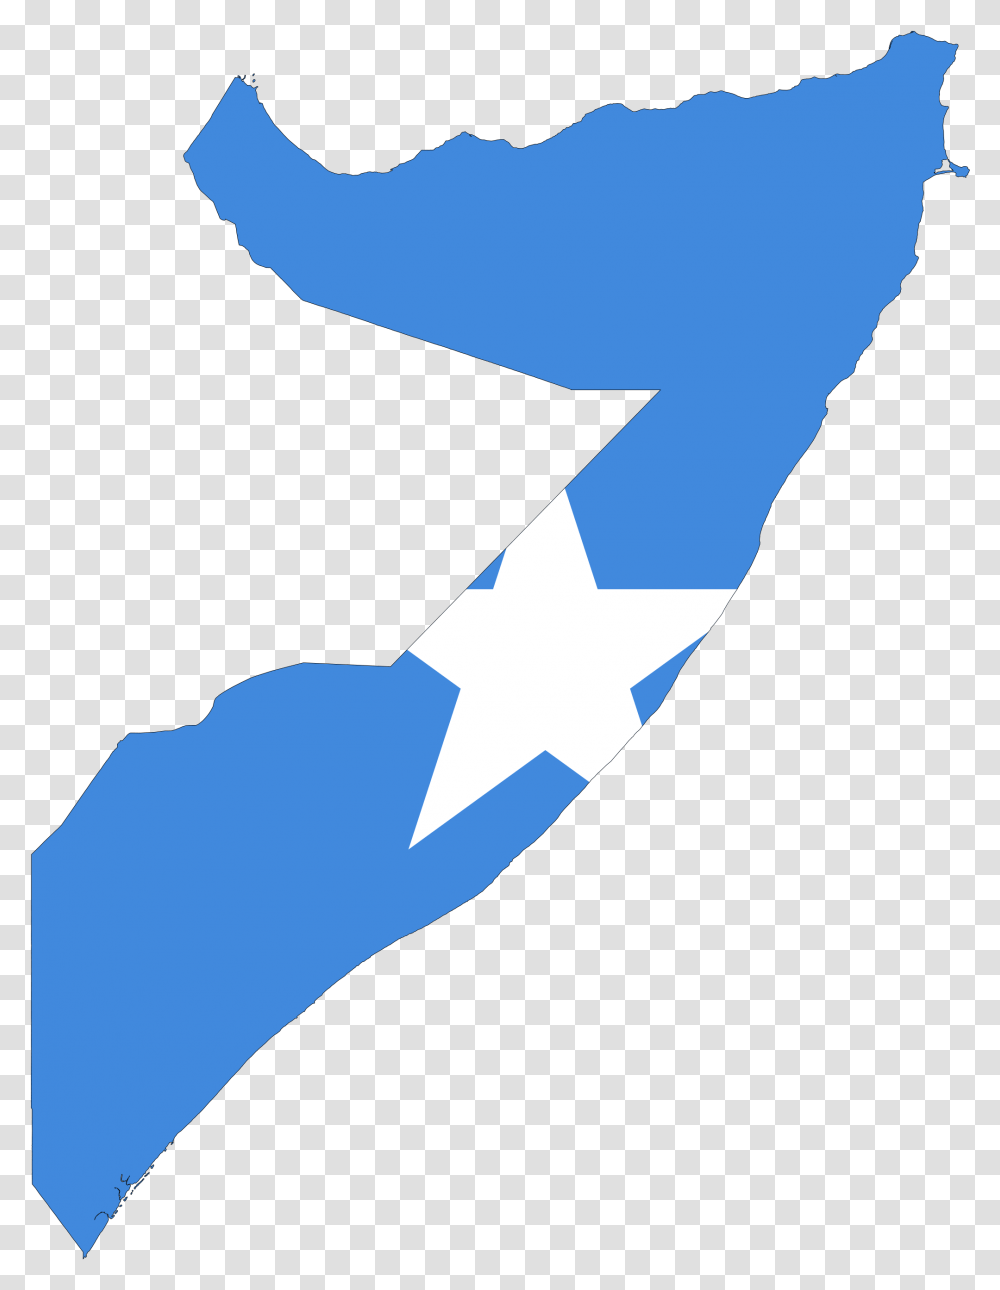 Somalia Flag Map Large Map Somalia Flag In Country, Arm, First Aid, Hand, Bandage Transparent Png